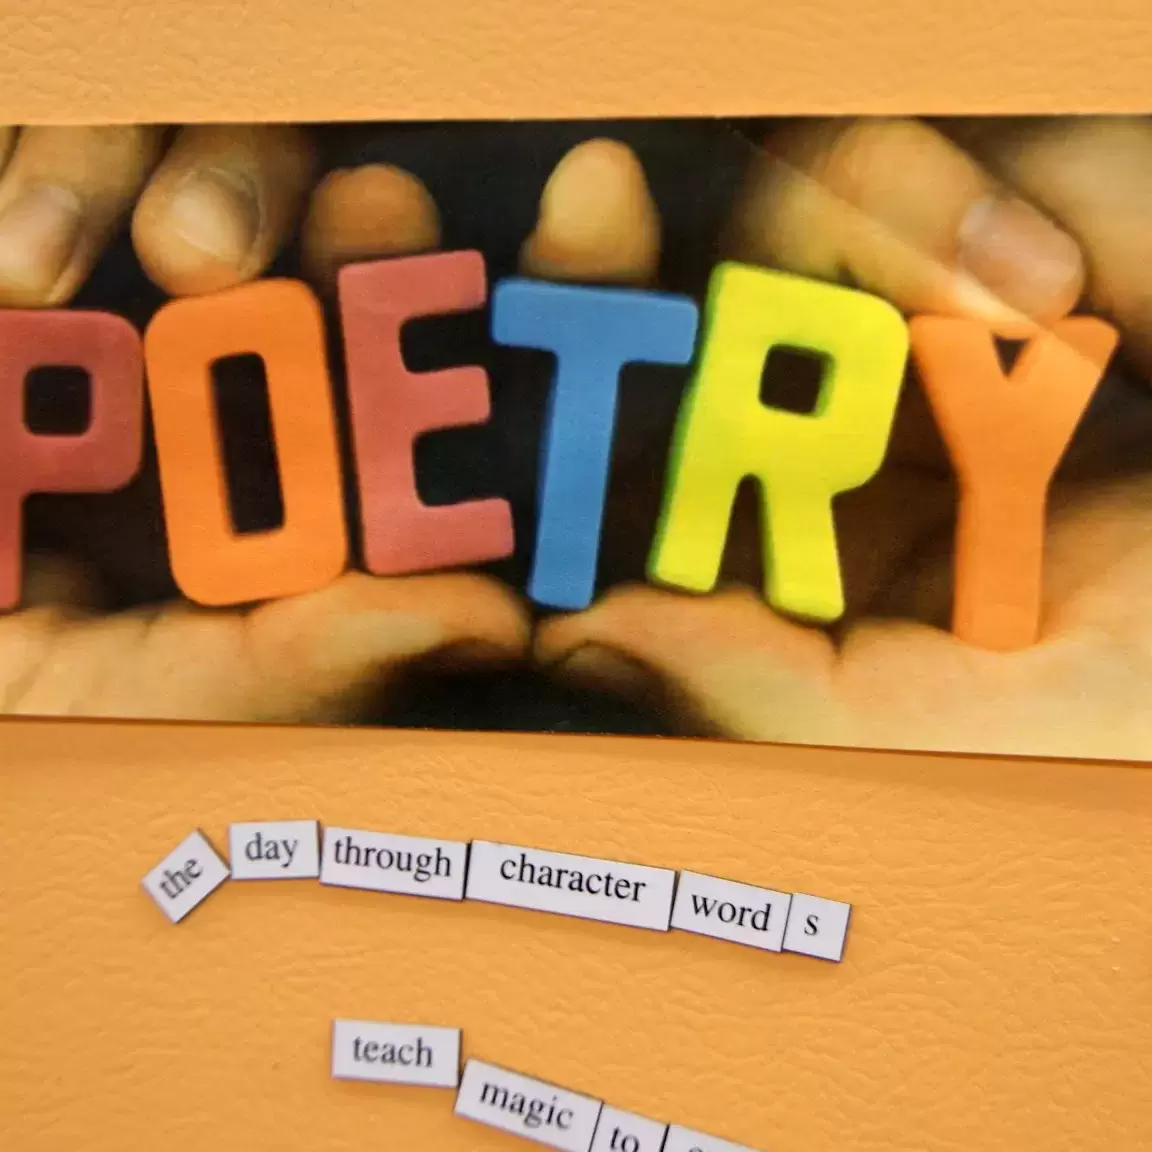 Pictured: the word poetry in large colorful block letters, underneath magnetic words for the thought - the day through character words device teach magic scattered on a golden-yellow background